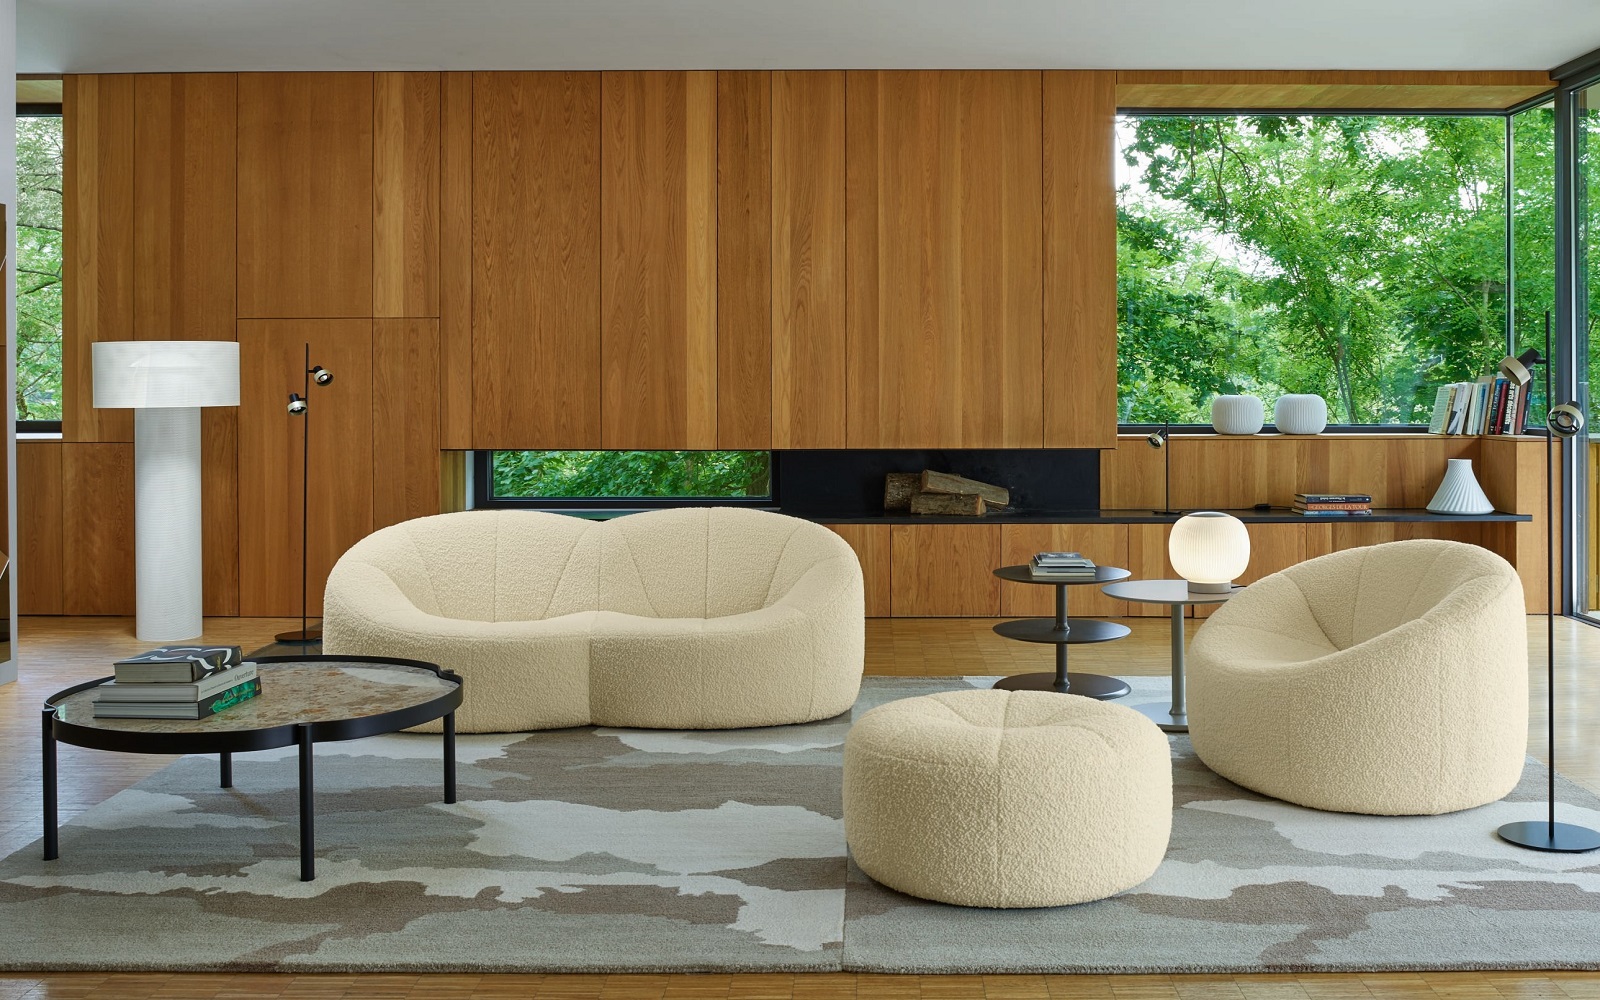 lounge with wooden panelled walls and mid century design furniture in cream from Ligne Roset